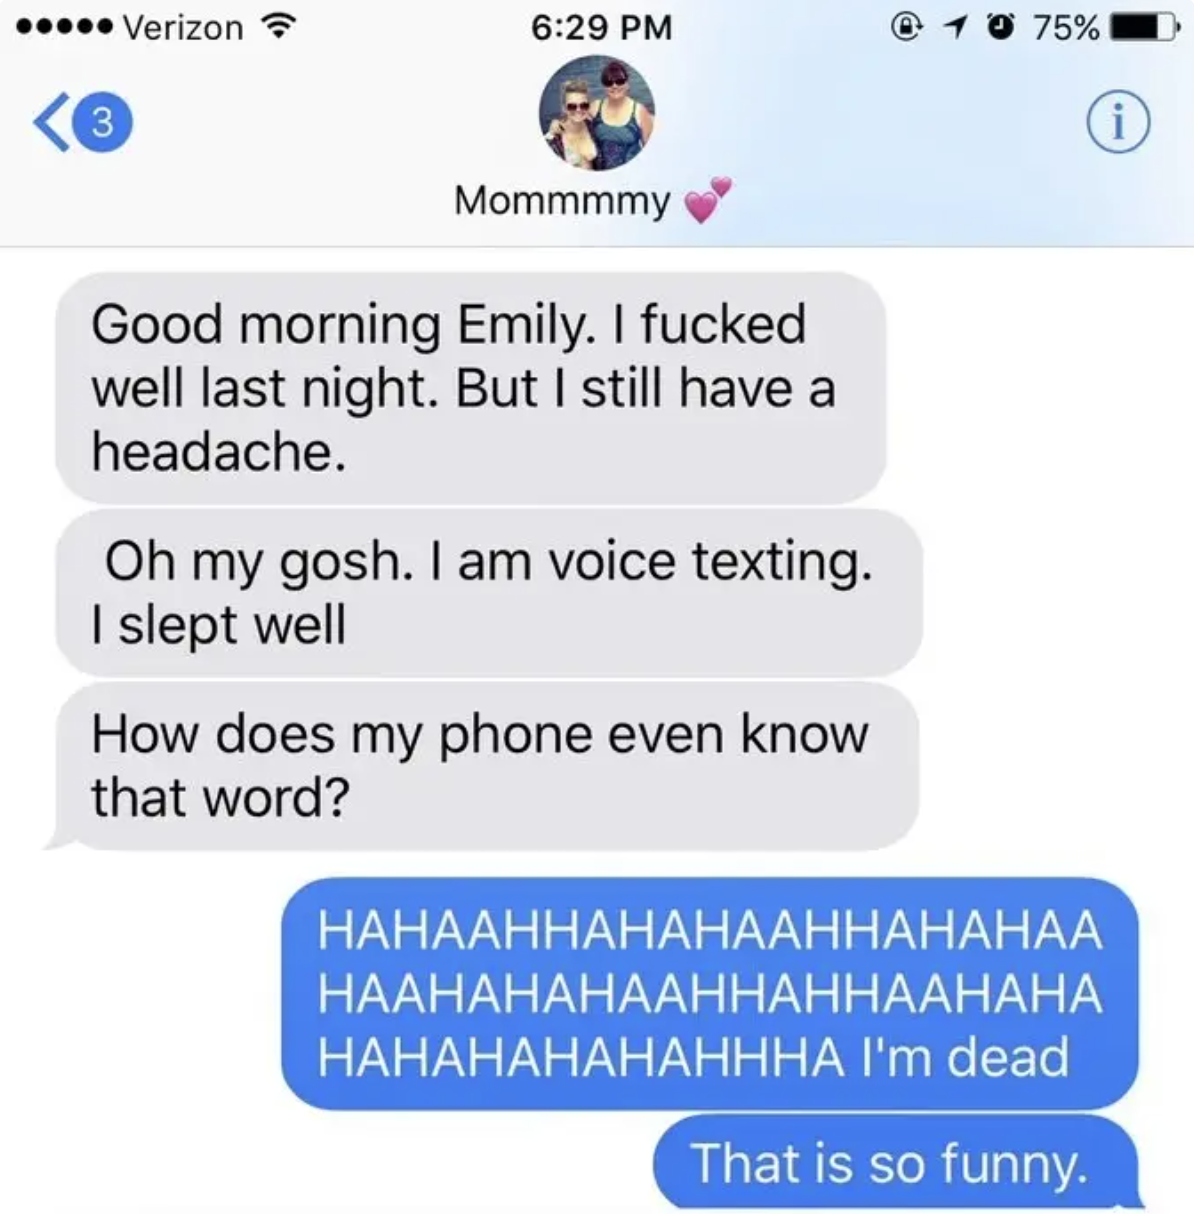 voice to text mistaking slept for the word fuck so it reads I slept well